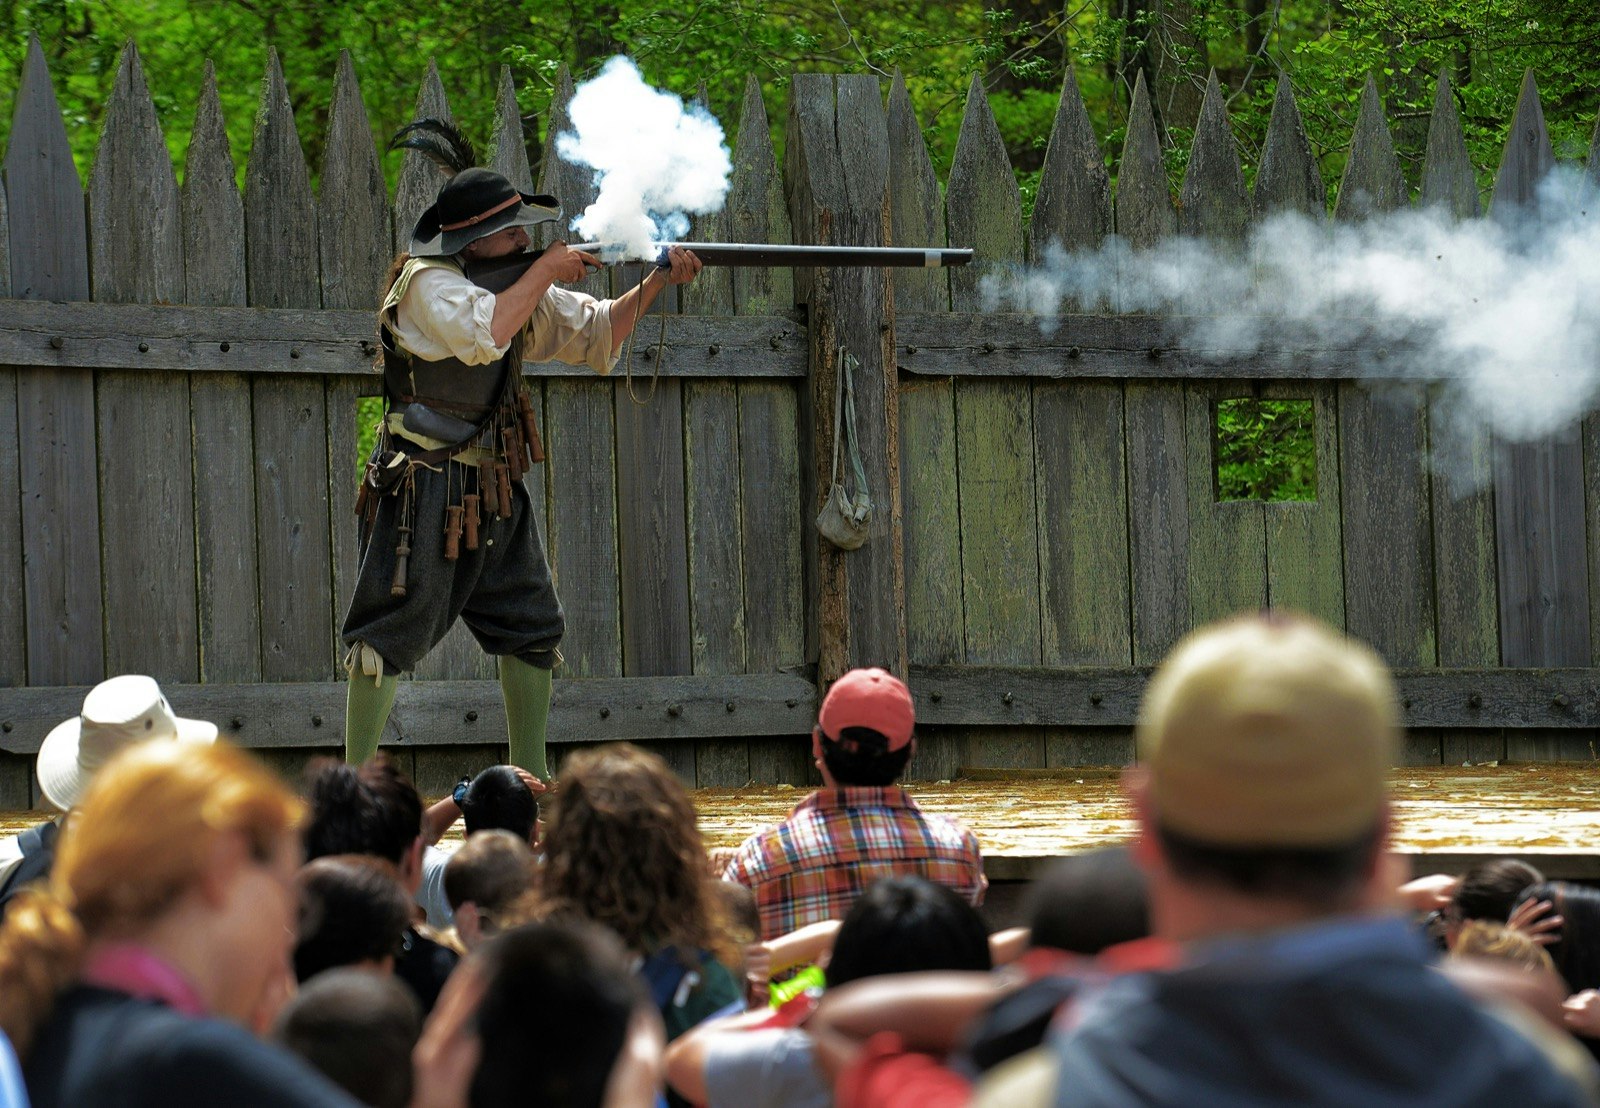 A man dressed in period dress fires a gun as spectators look on at Jamestown Settlement, one of the most important sites of history in the US